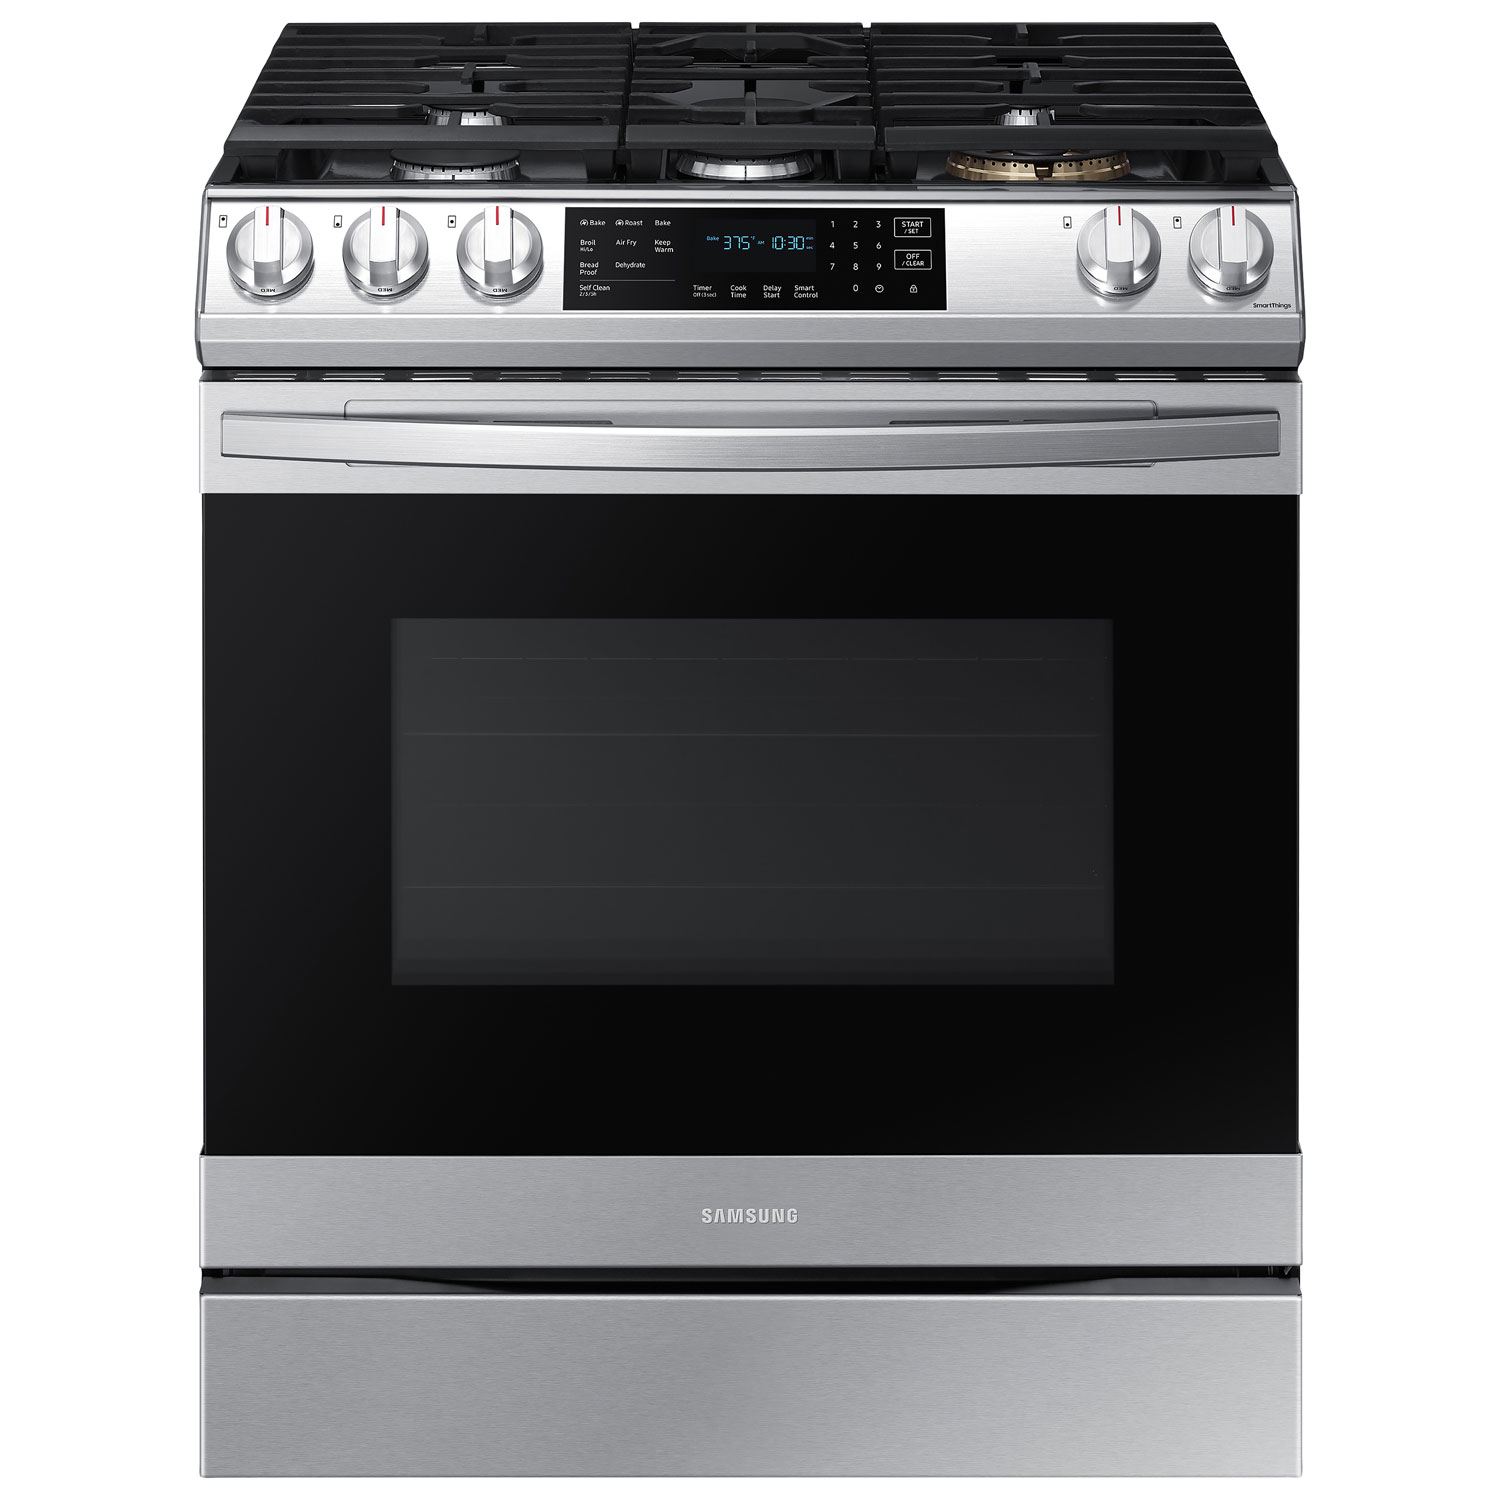 Samsung 30" 6.0 Cu. Ft. True Convection 5-Burner Slide-In Gas Air Fry Range (NX60T8511SS/AA) -Stainless